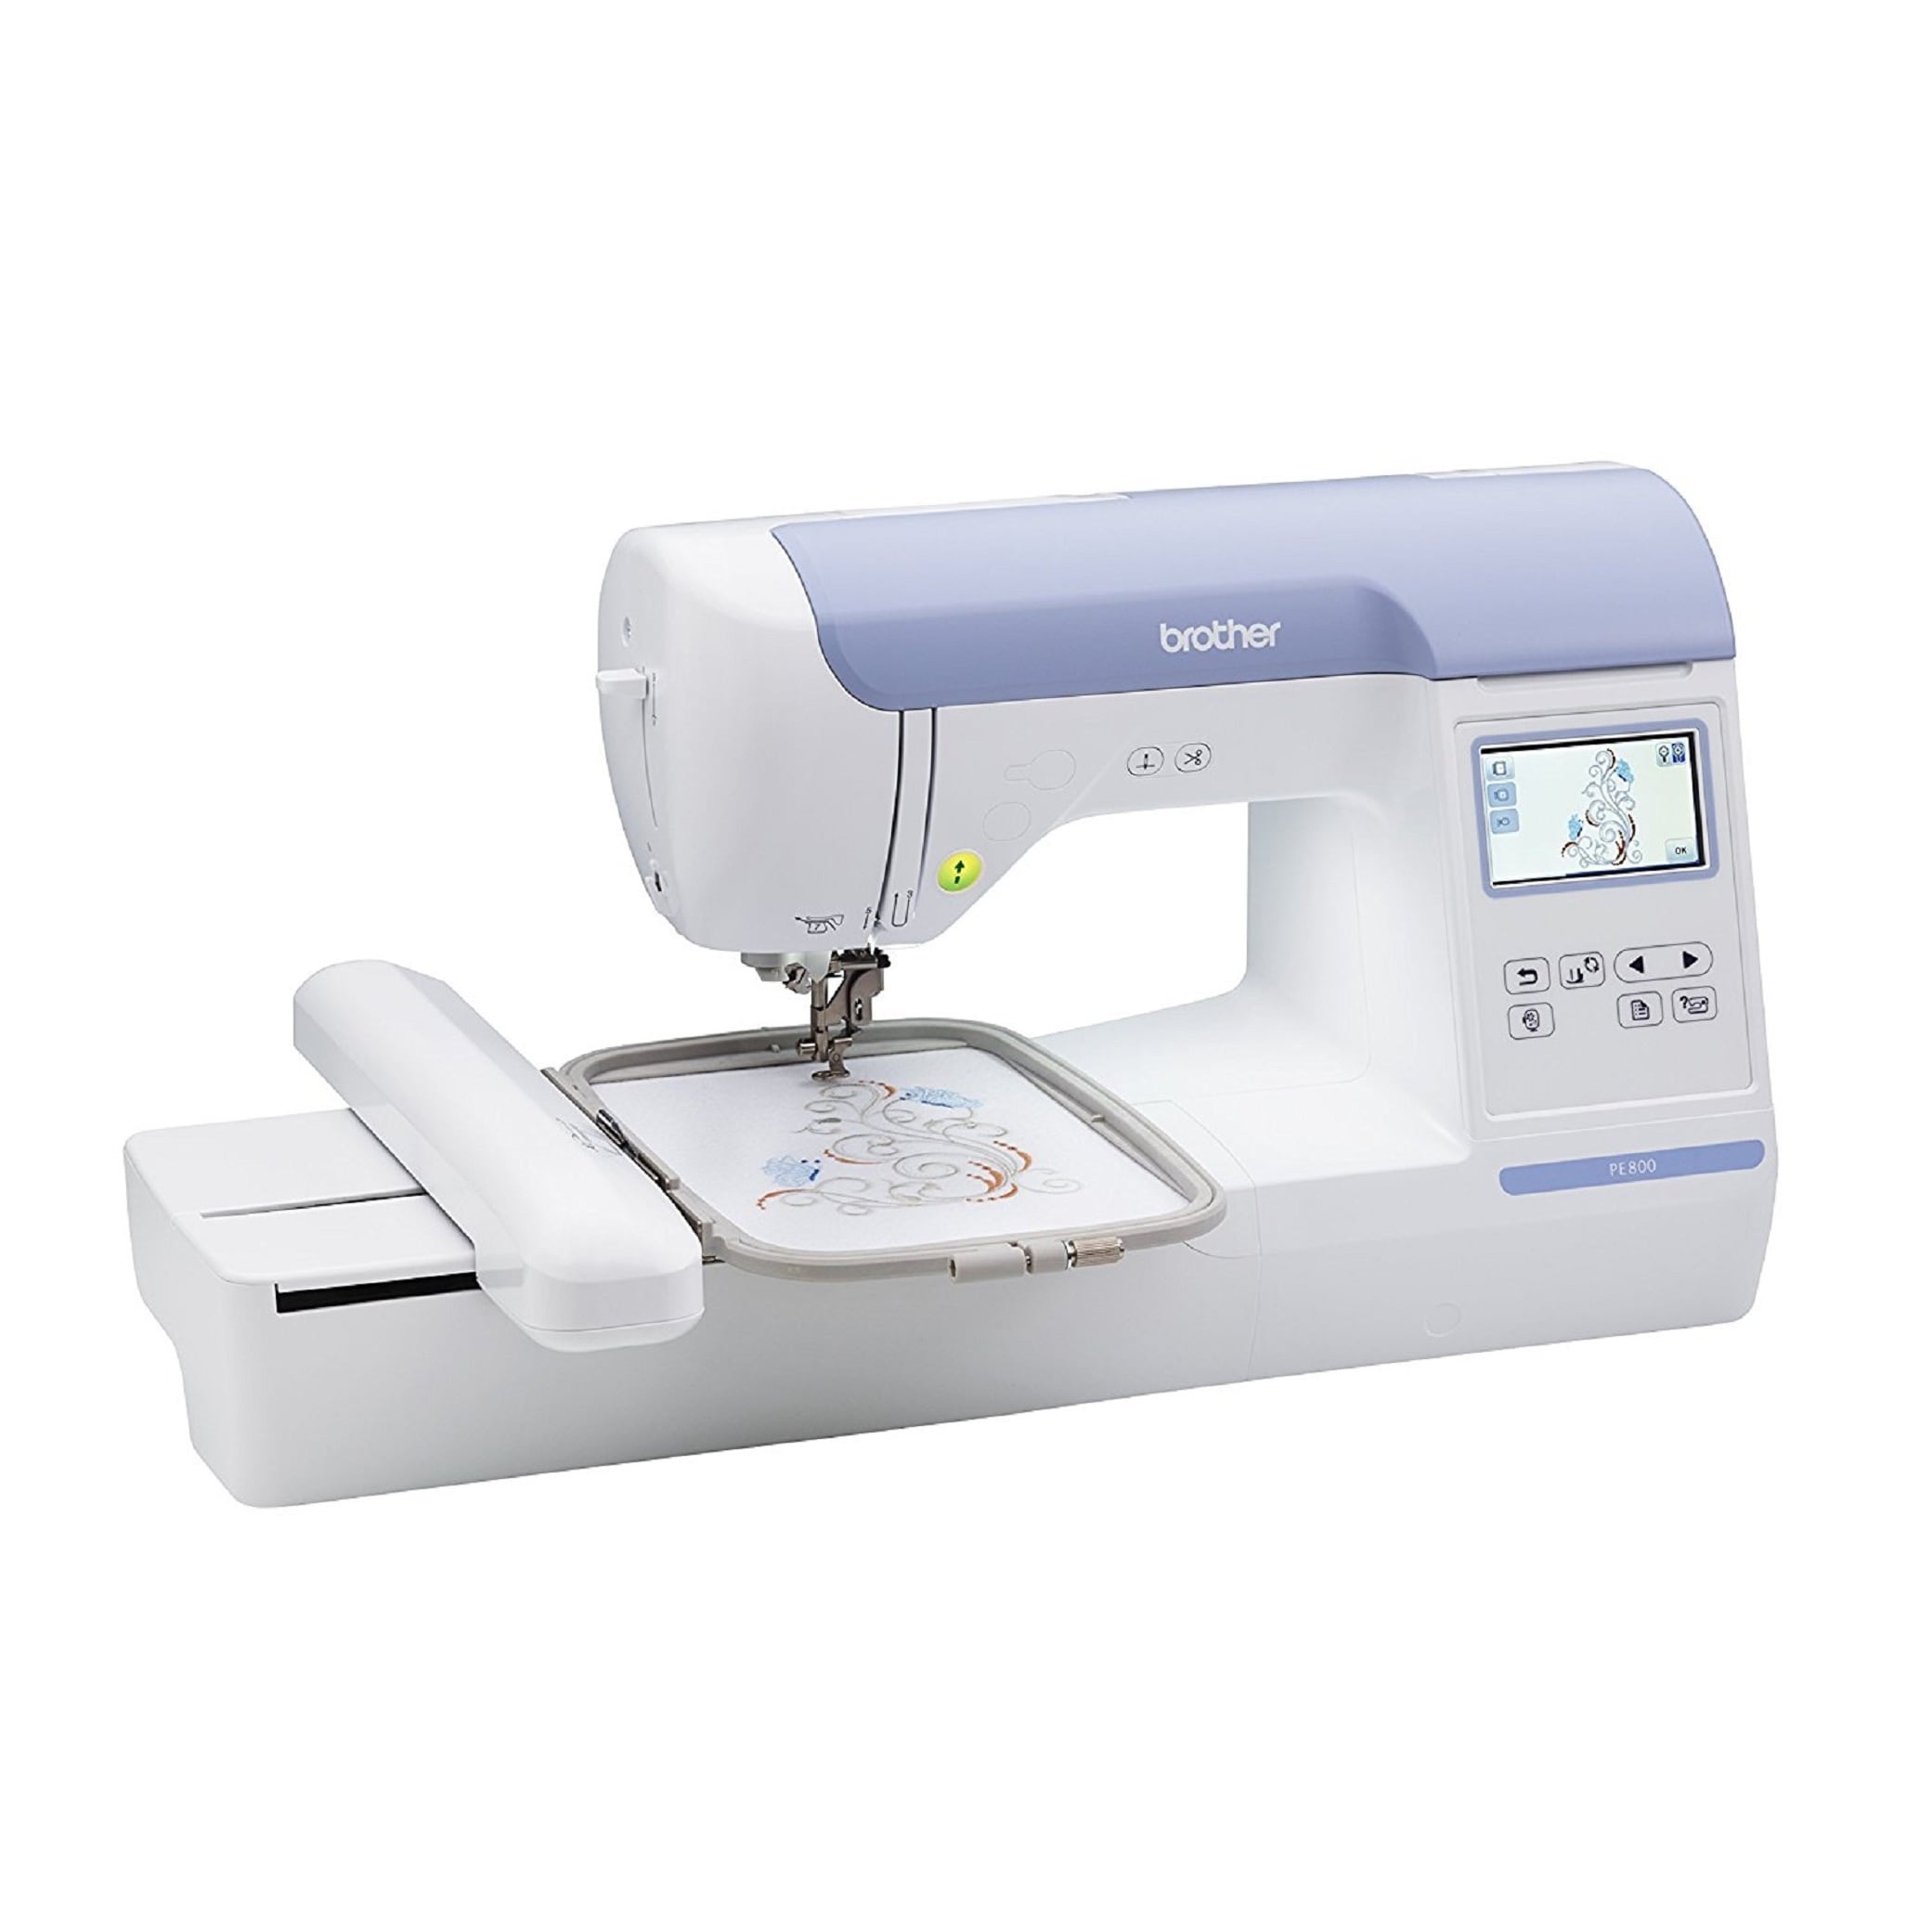 Brother LB5500 2-In-1 Sewing and Embroidery Machine with 135 Built